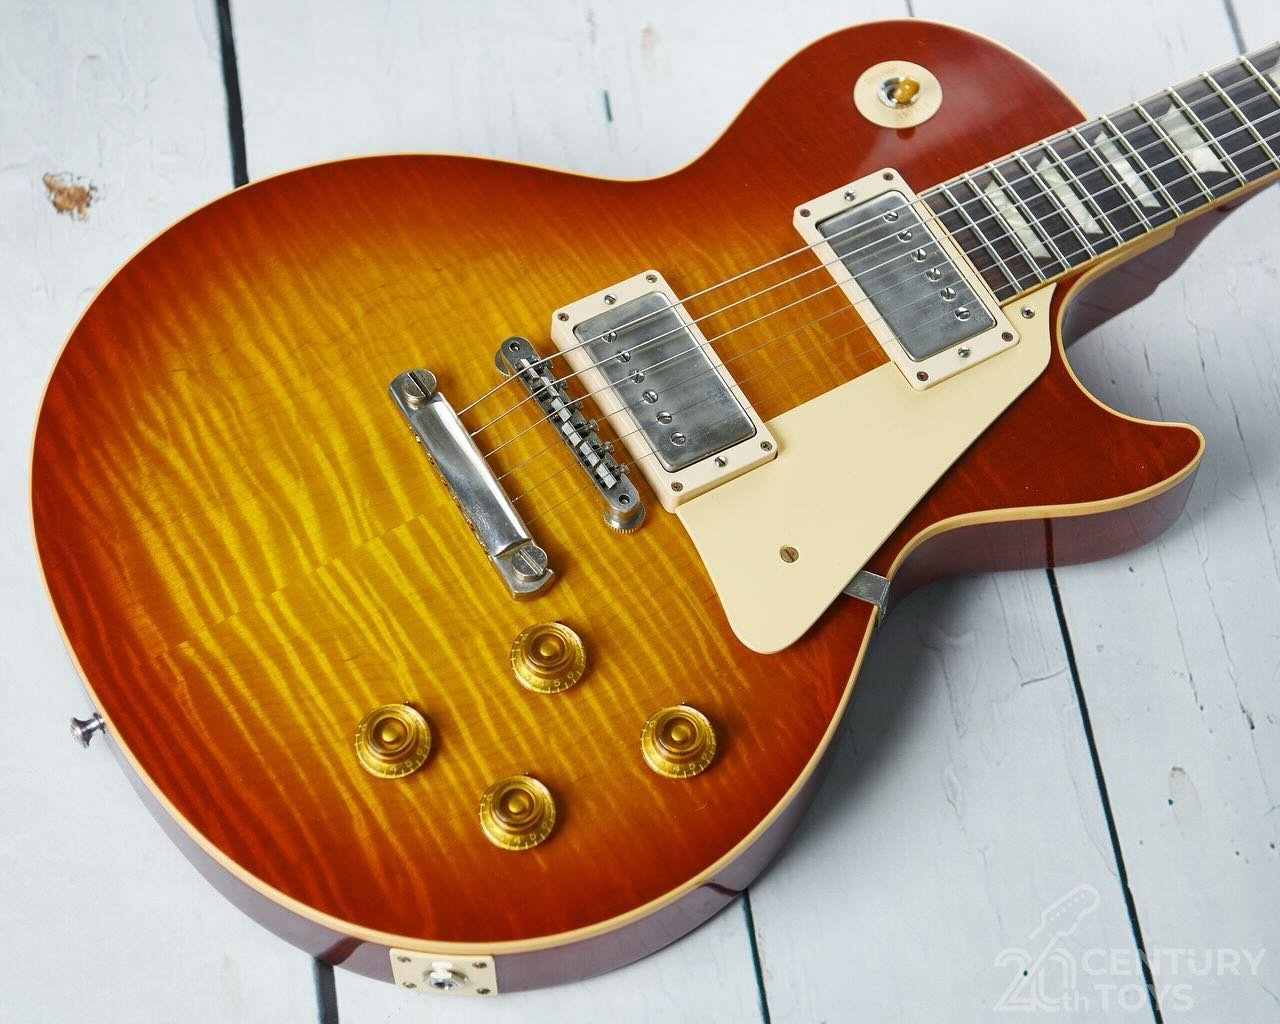 #flametopfriday🔥 Here is 60th Anniversary &lsquo;59 Les Paul Standard reissue we had not long ago. These are great guitars and probably the closest the Gibson Custom Shop has got to true vintage spec. 
.
www.20thcenturytoys.co
.
#gibsonlespaul #gibs